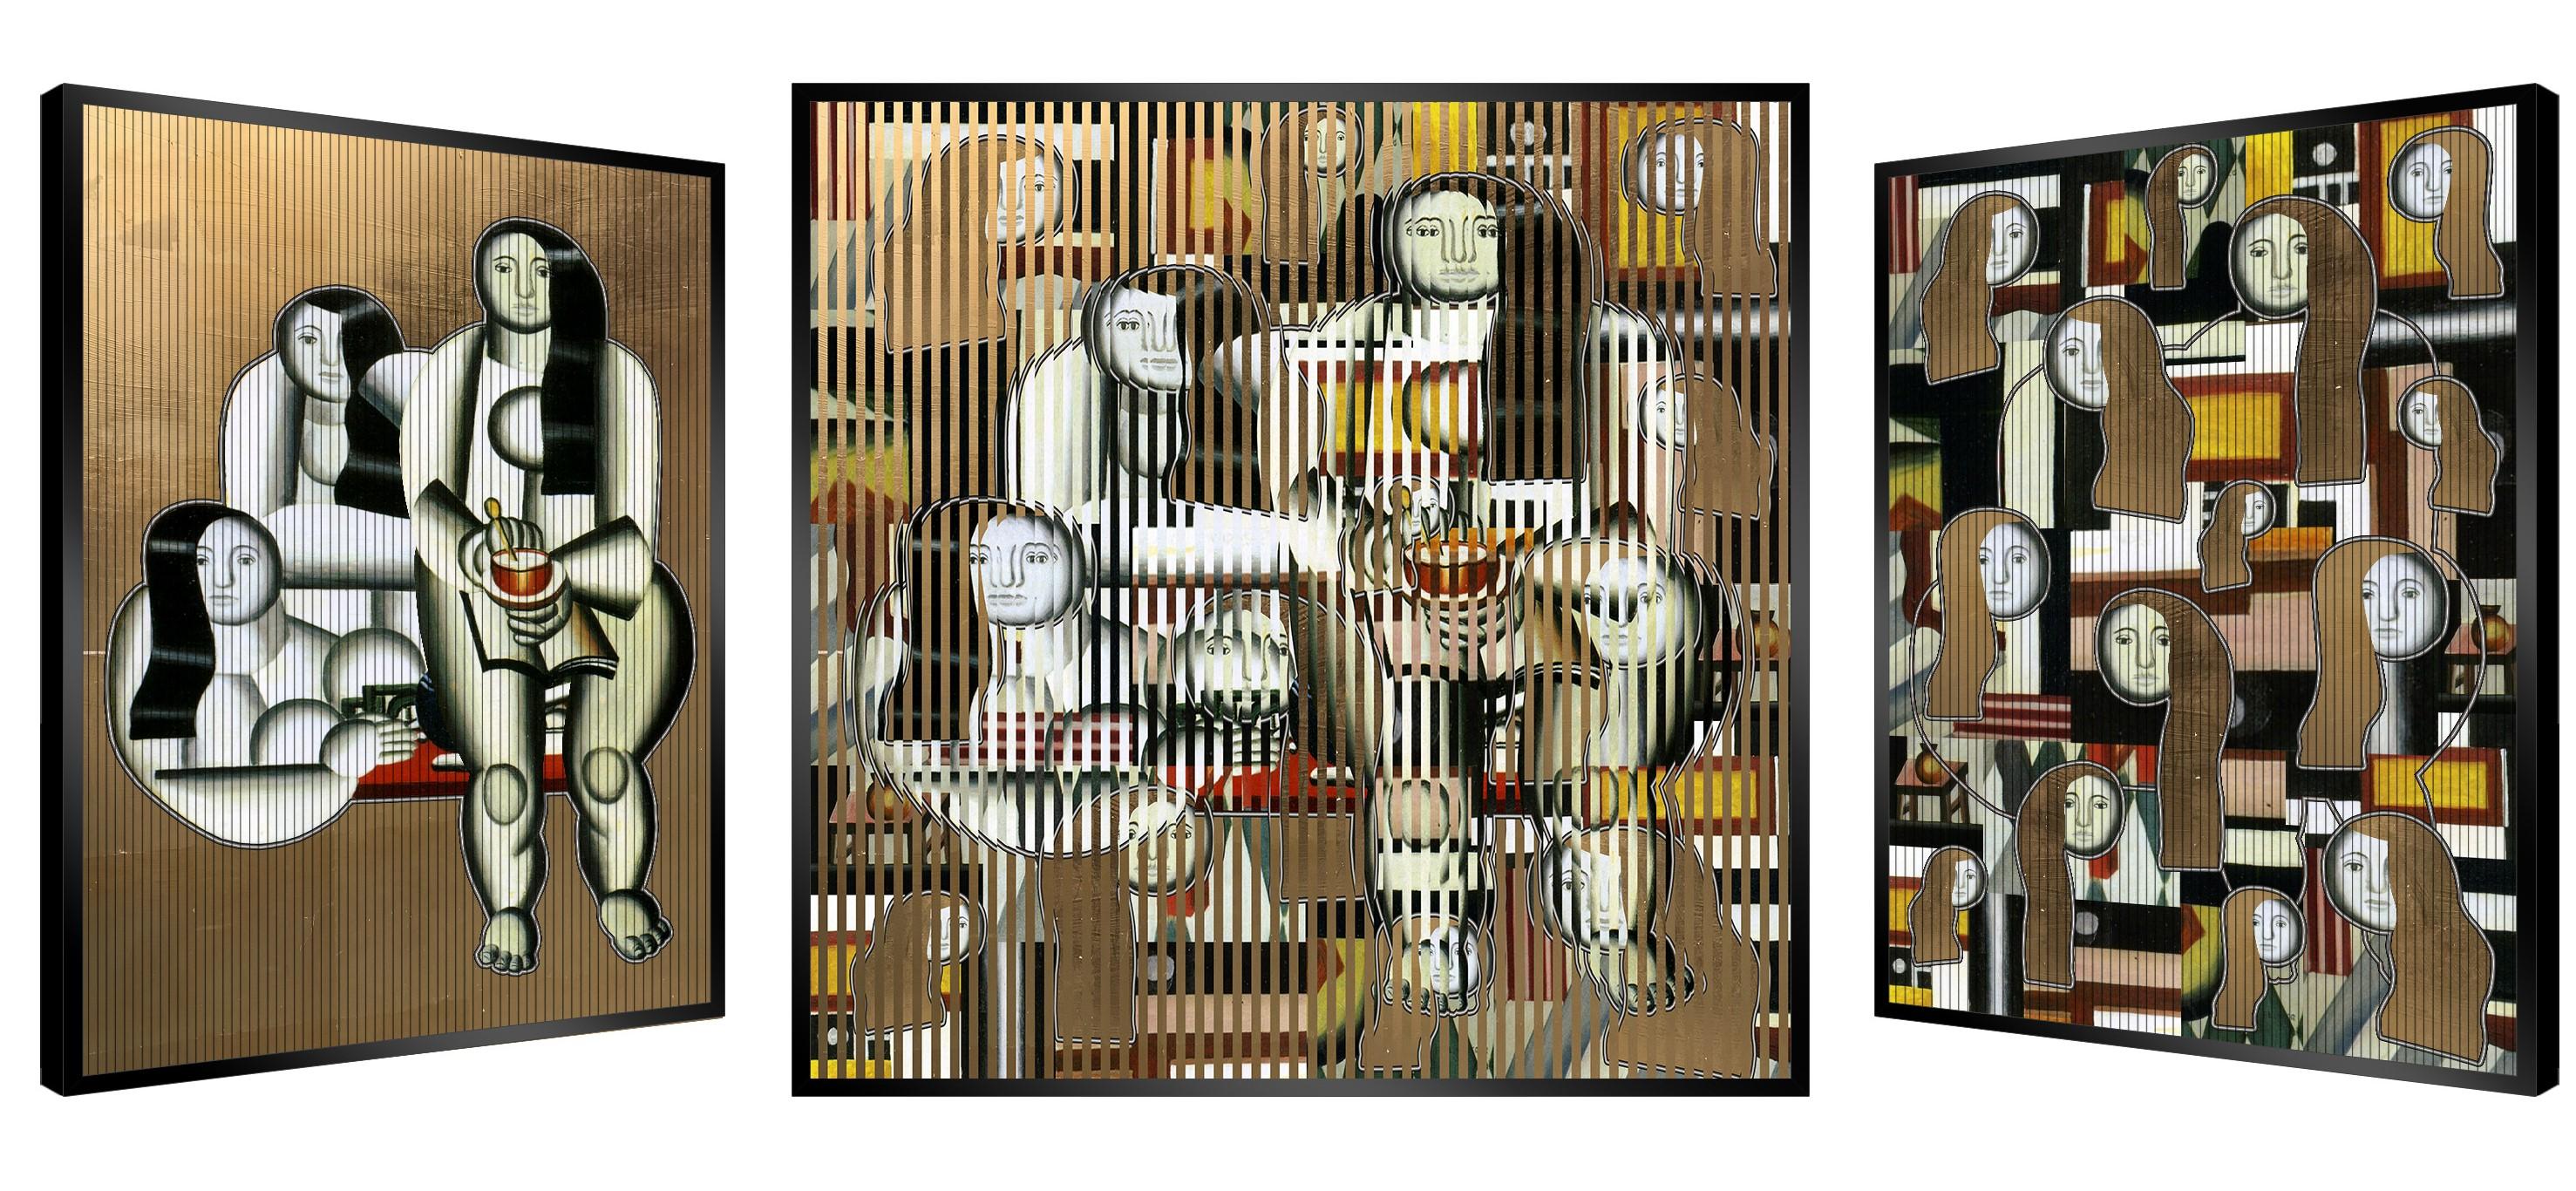 Lunch With Friends, mixed media, 2020, museum style, 2'9'', Rubinstein - Mixed Media Art by Patrick Rubinstein